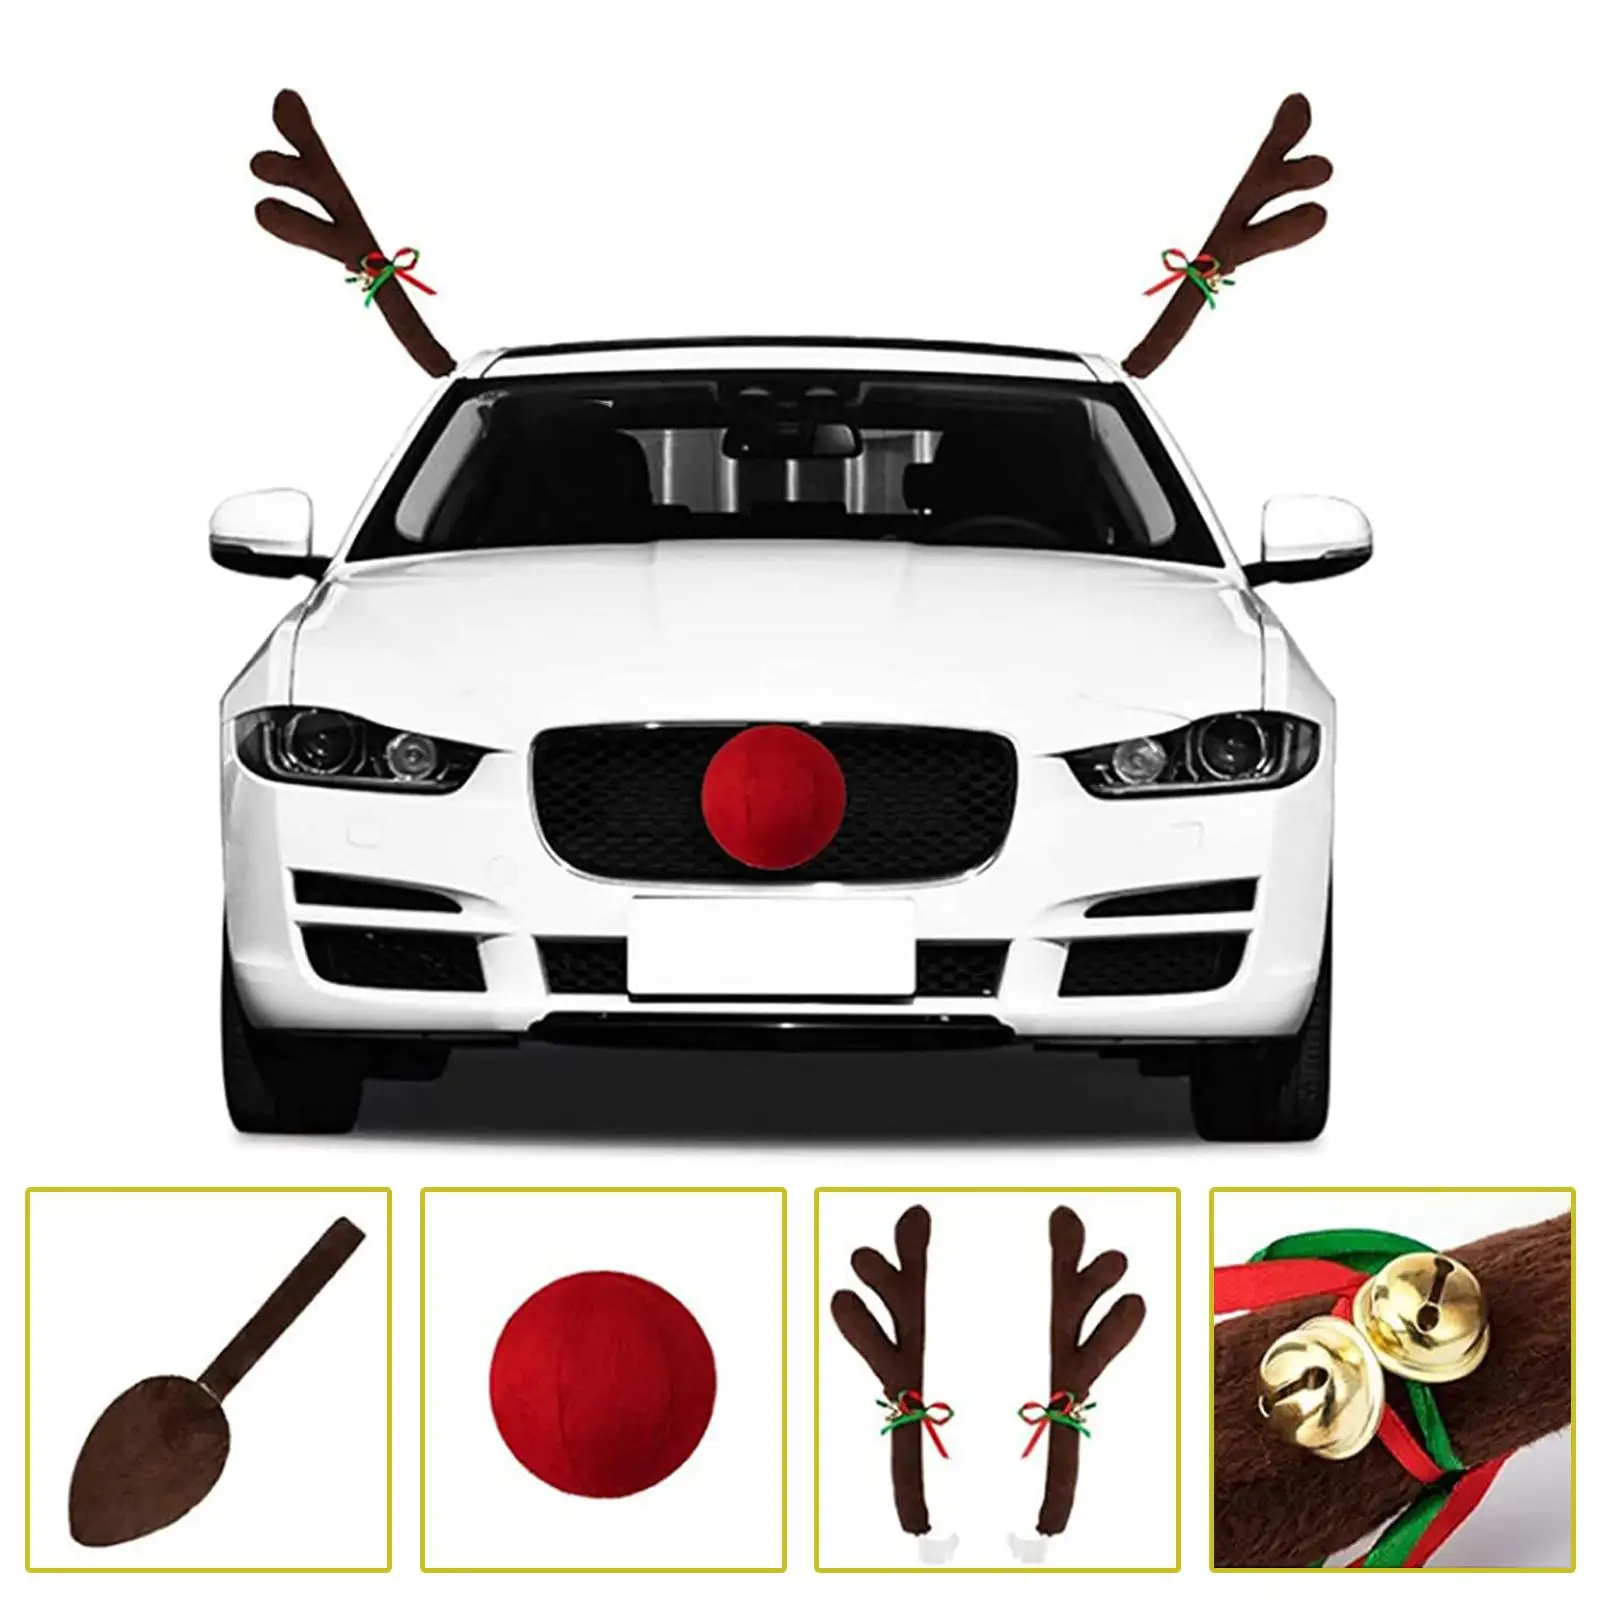 Reindeer Antlers for Car Decoration Easy Installation Chrictmas Gift for Truck